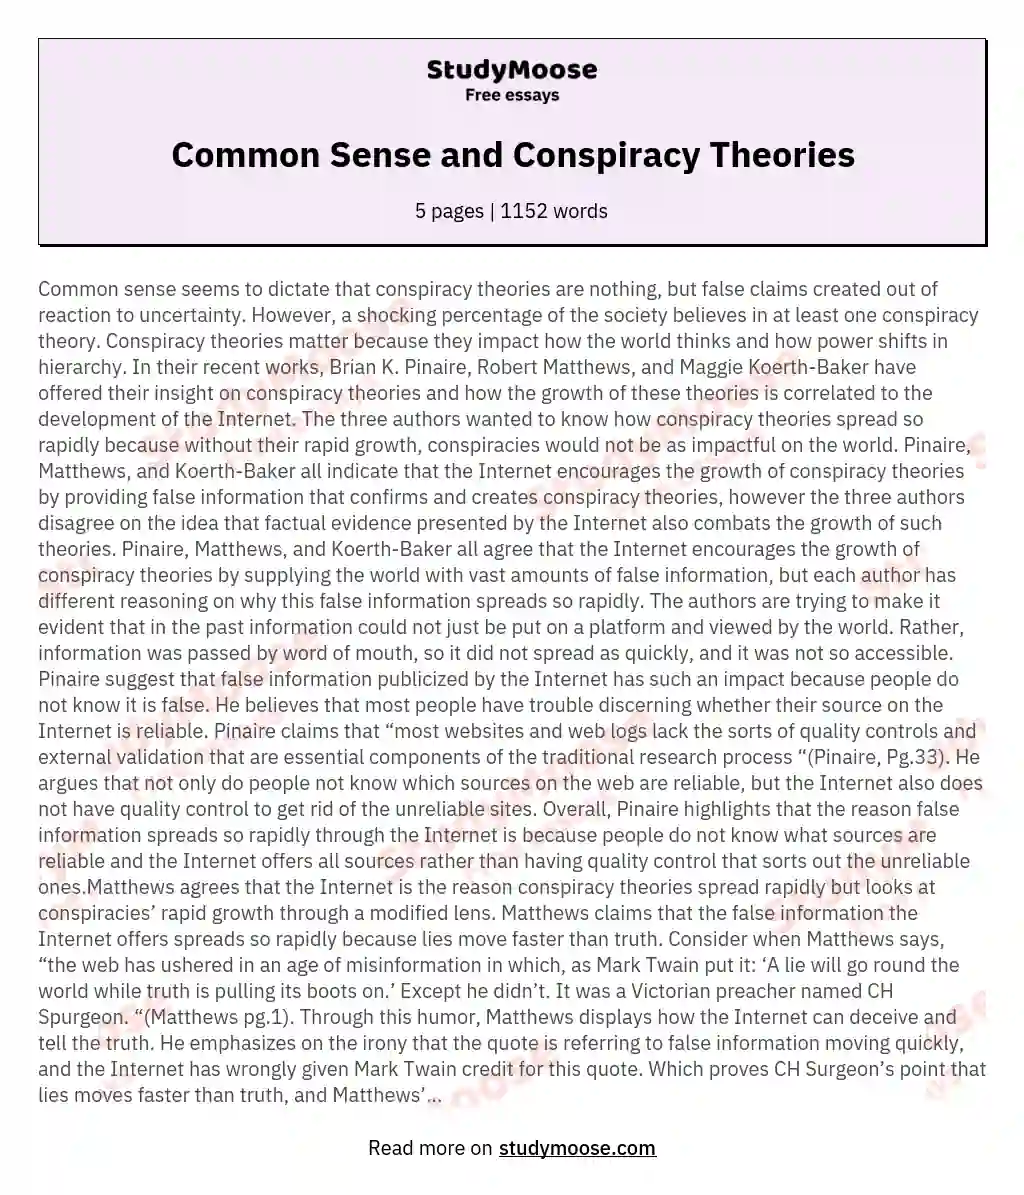 Common Sense and Conspiracy Theories